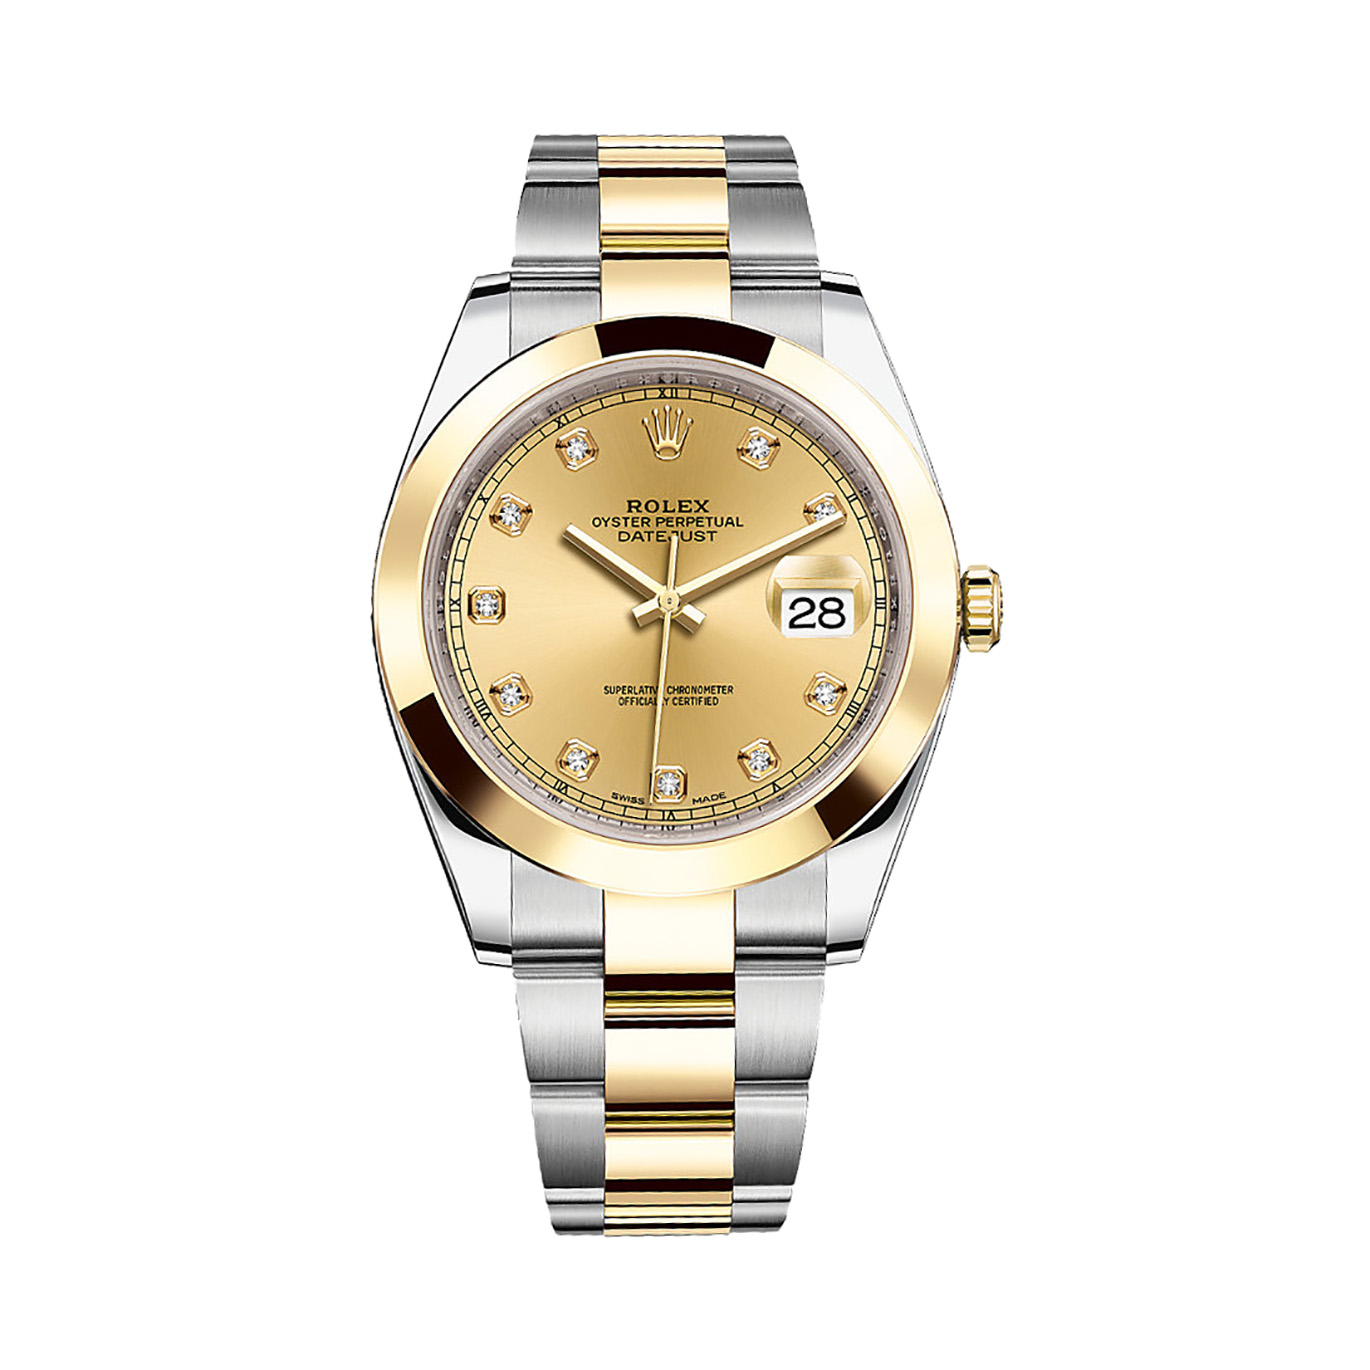 Datejust 41 126303 Gold & Stainless Steel Watch (Champagne Set With Diamonds)